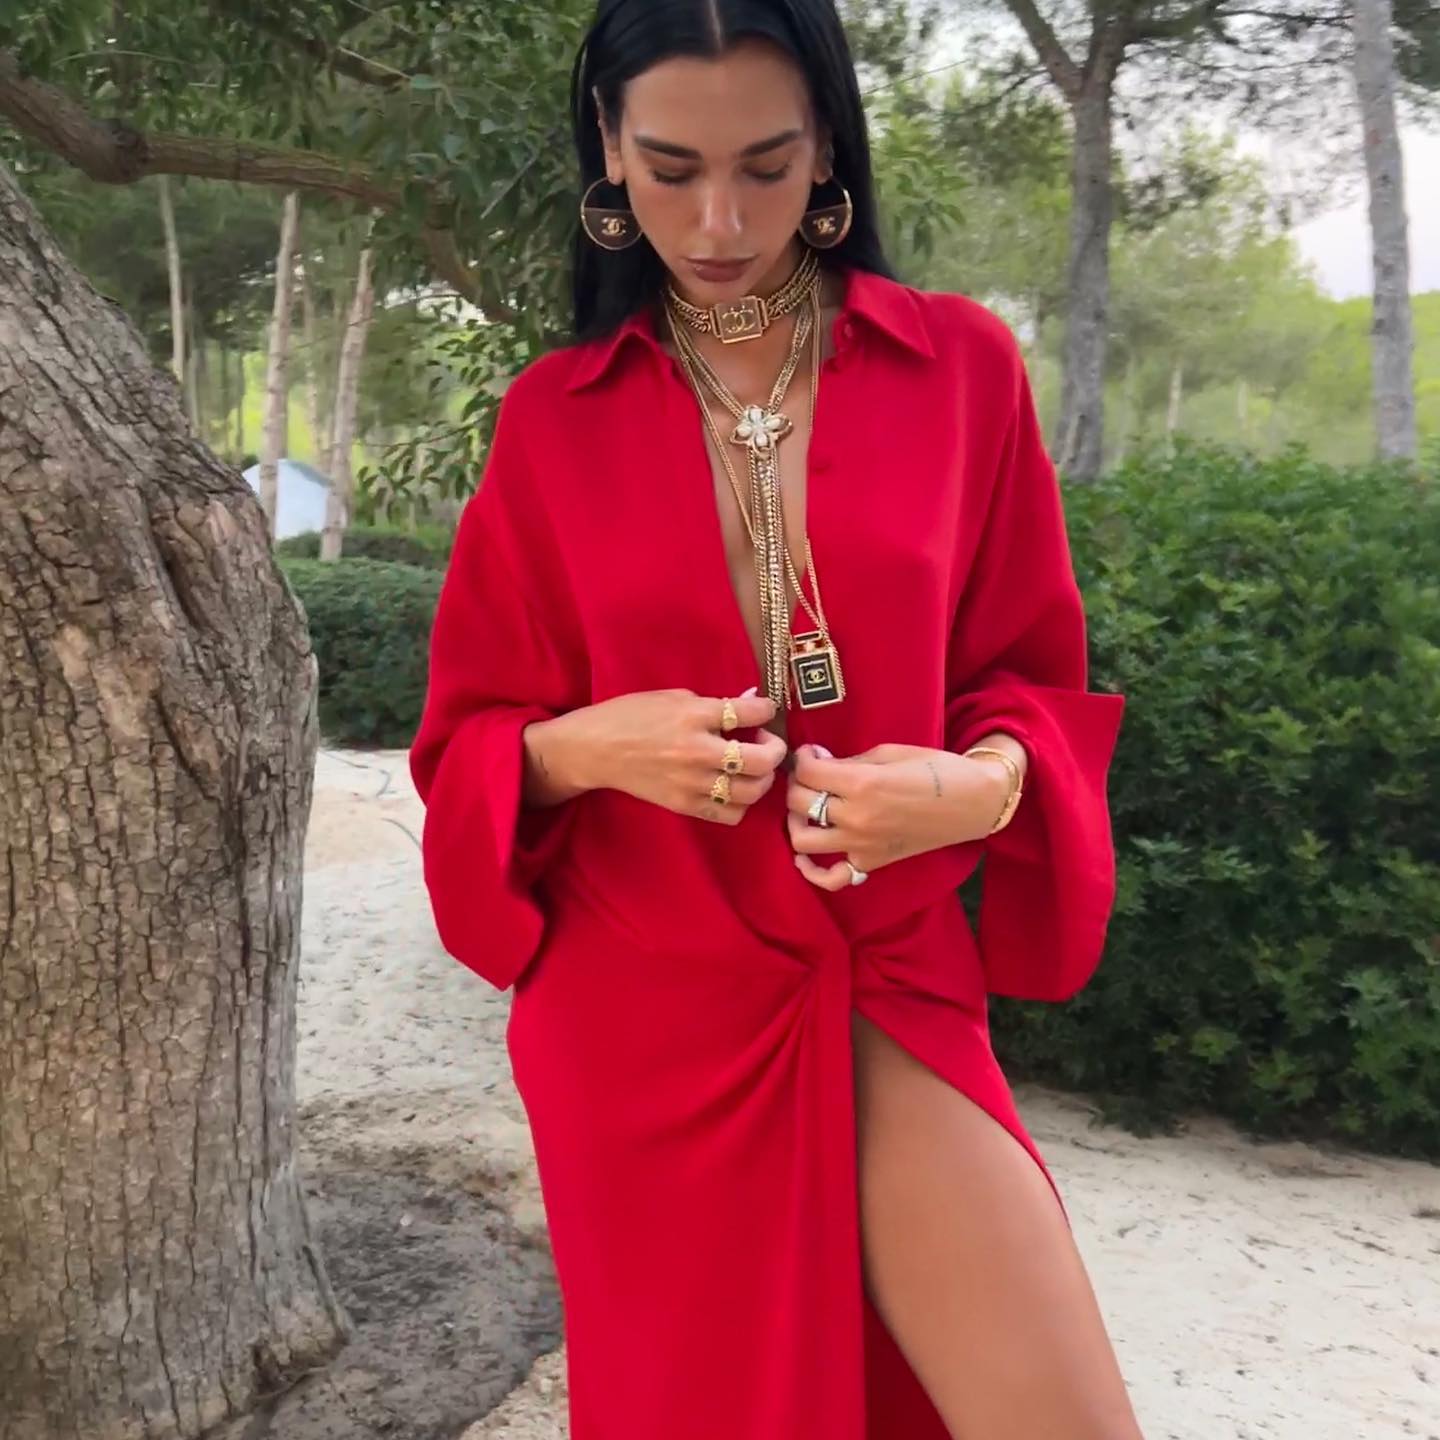 The popstar donned a red blazer dress with chunky Chanel necklaces